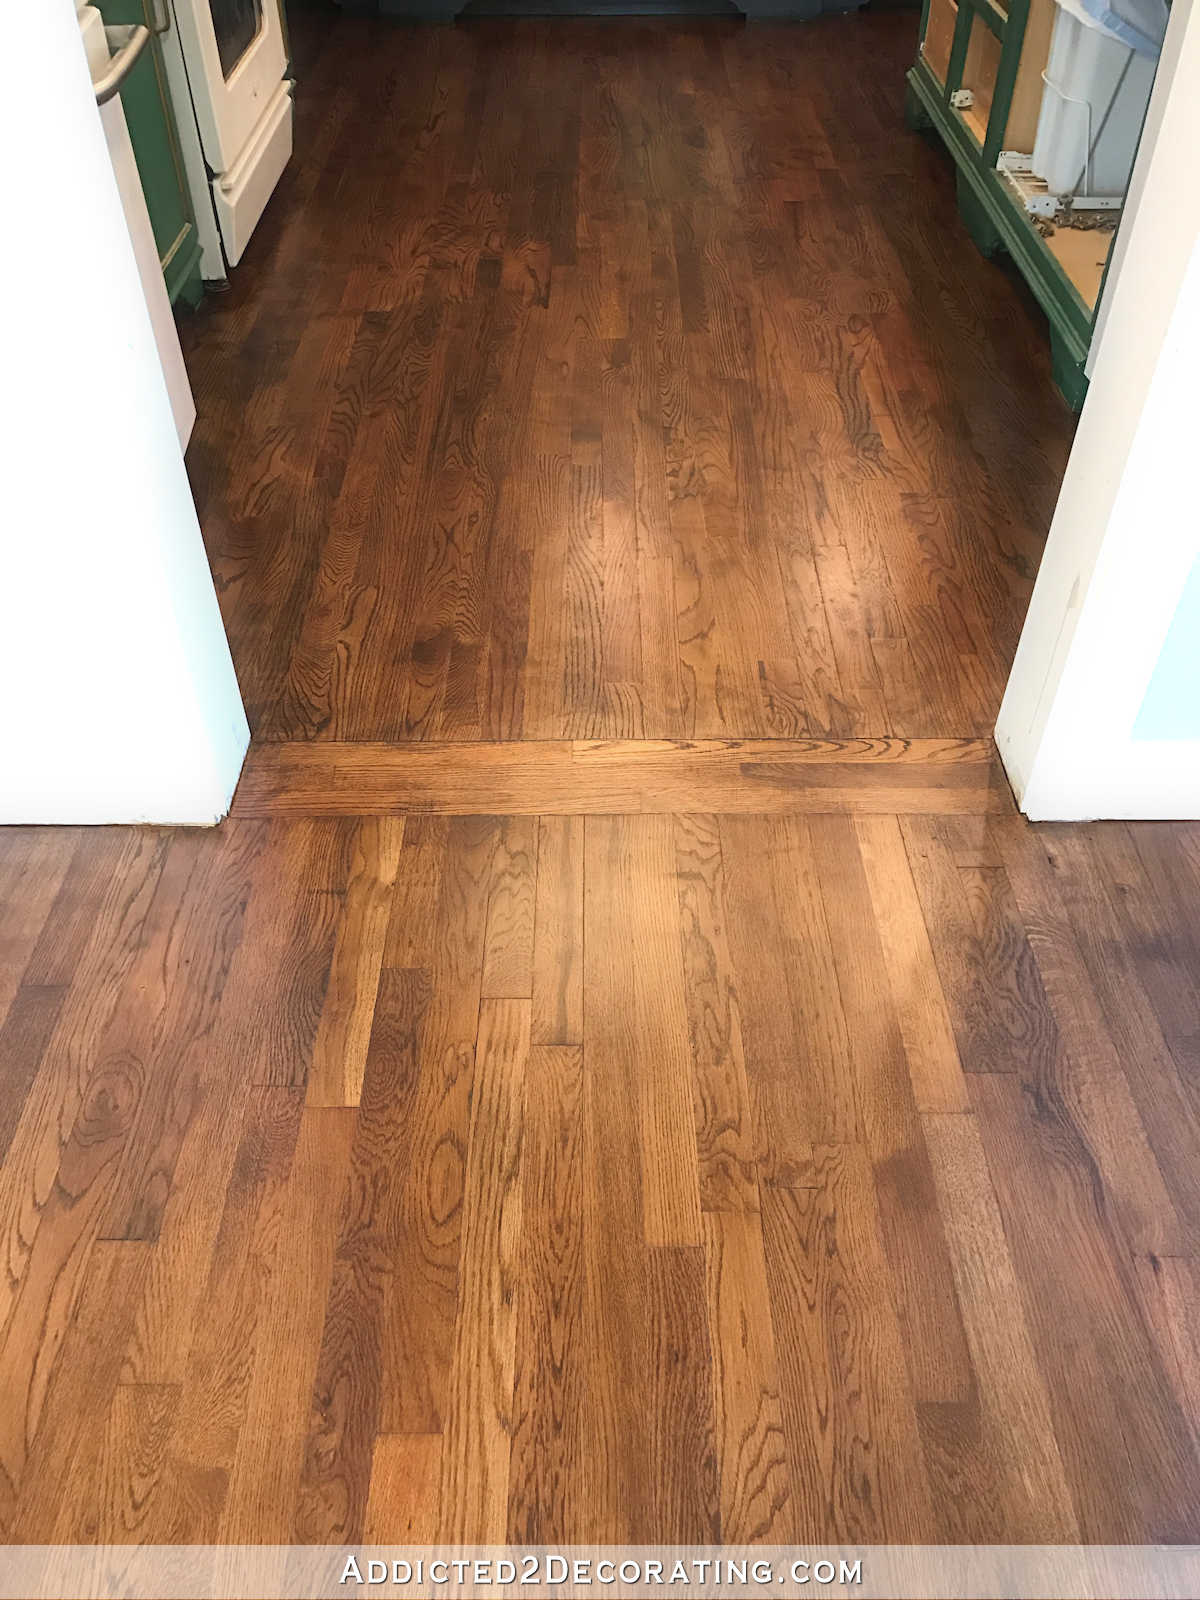 My Newly Refinished Red Oak Hardwood, How To Join Two Hardwood Floors Between Rooms